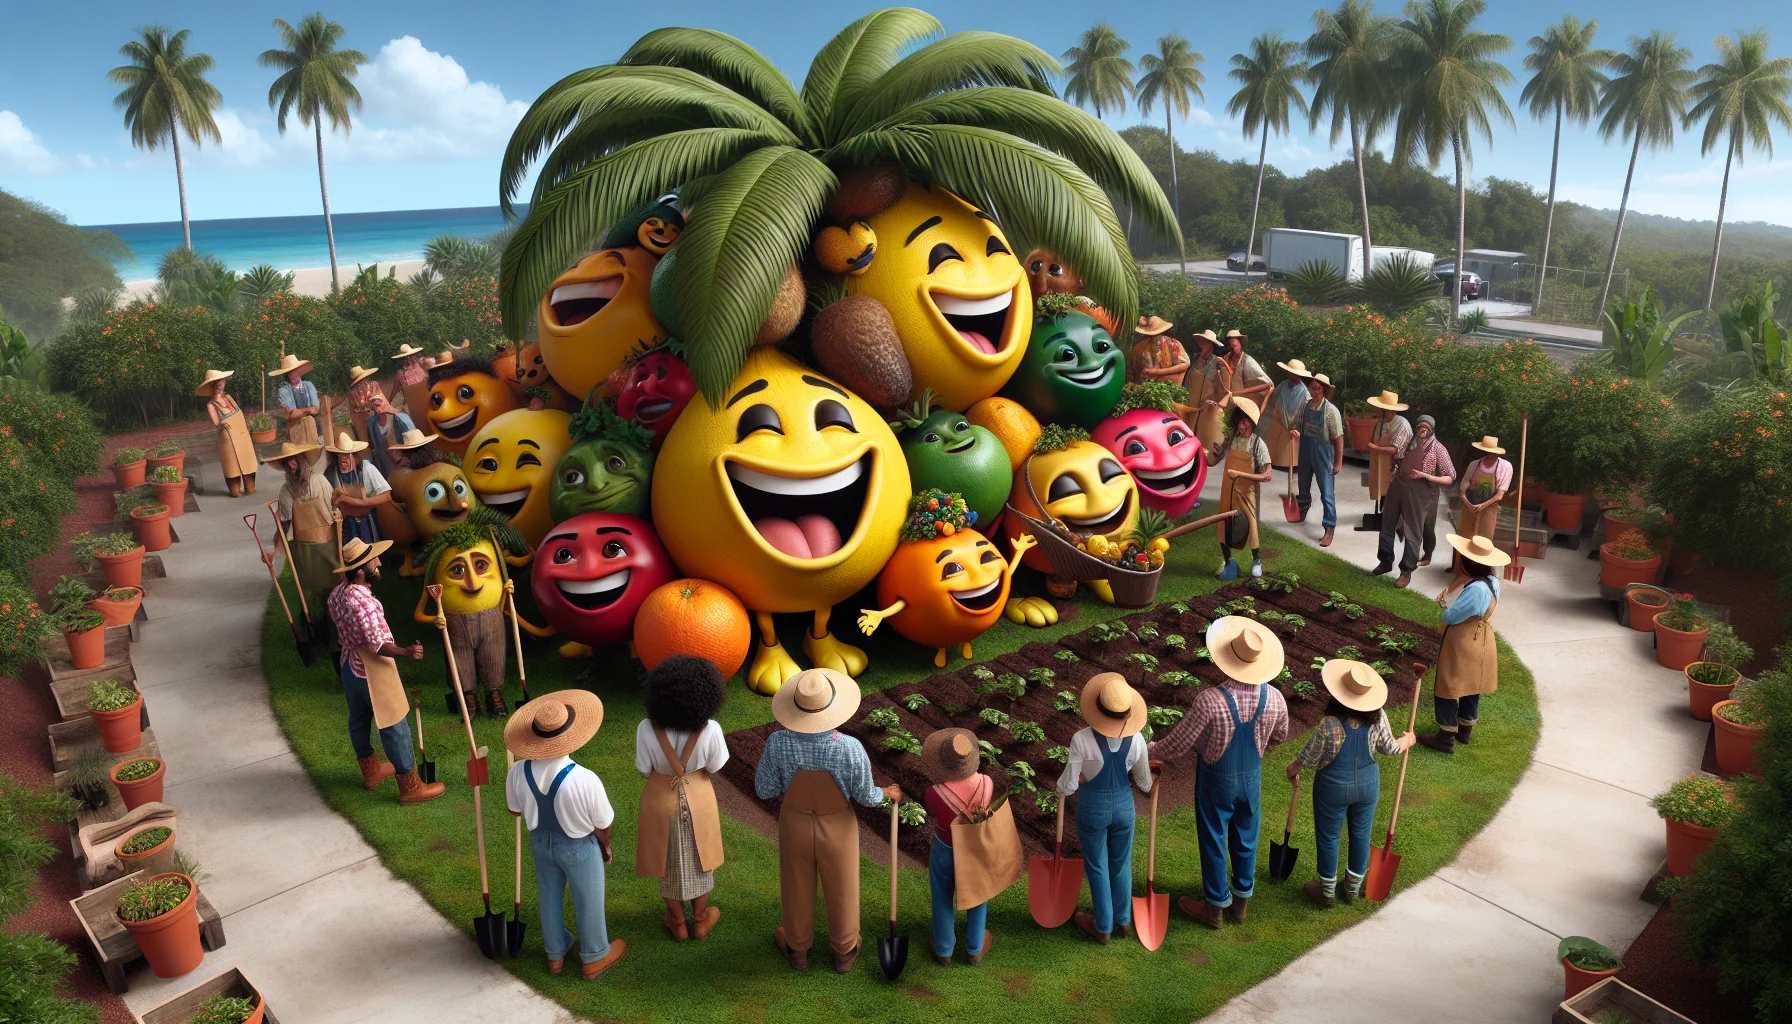 Imagine a whimsical and humorous gardening scenario in a tropical setting. In the foreground, a large, lush palm tree is swaying gently in the wind, bearing an abundance of ripe, juicy fruits. Curiously enough, the fruits on the tree have joyful faces expressing pure bliss and they seem to be partaking in merry dance moves, swaying with the rhythm of the wind. On the ground below, a diverse group of people representing various descents including Black, White, Hispanic, South Asian and Middle-Eastern are watching in awe and laughter, their expressions indicating curiosity and intrigue. Sporting a variety of gardening attire from straw hats to overalls, they are holding various gardening tools suggesting their interest in this rewarding hobby. The scene is designed to spark joy, highlight the fun side of gardening, and promote the enjoyment of outdoor activities.